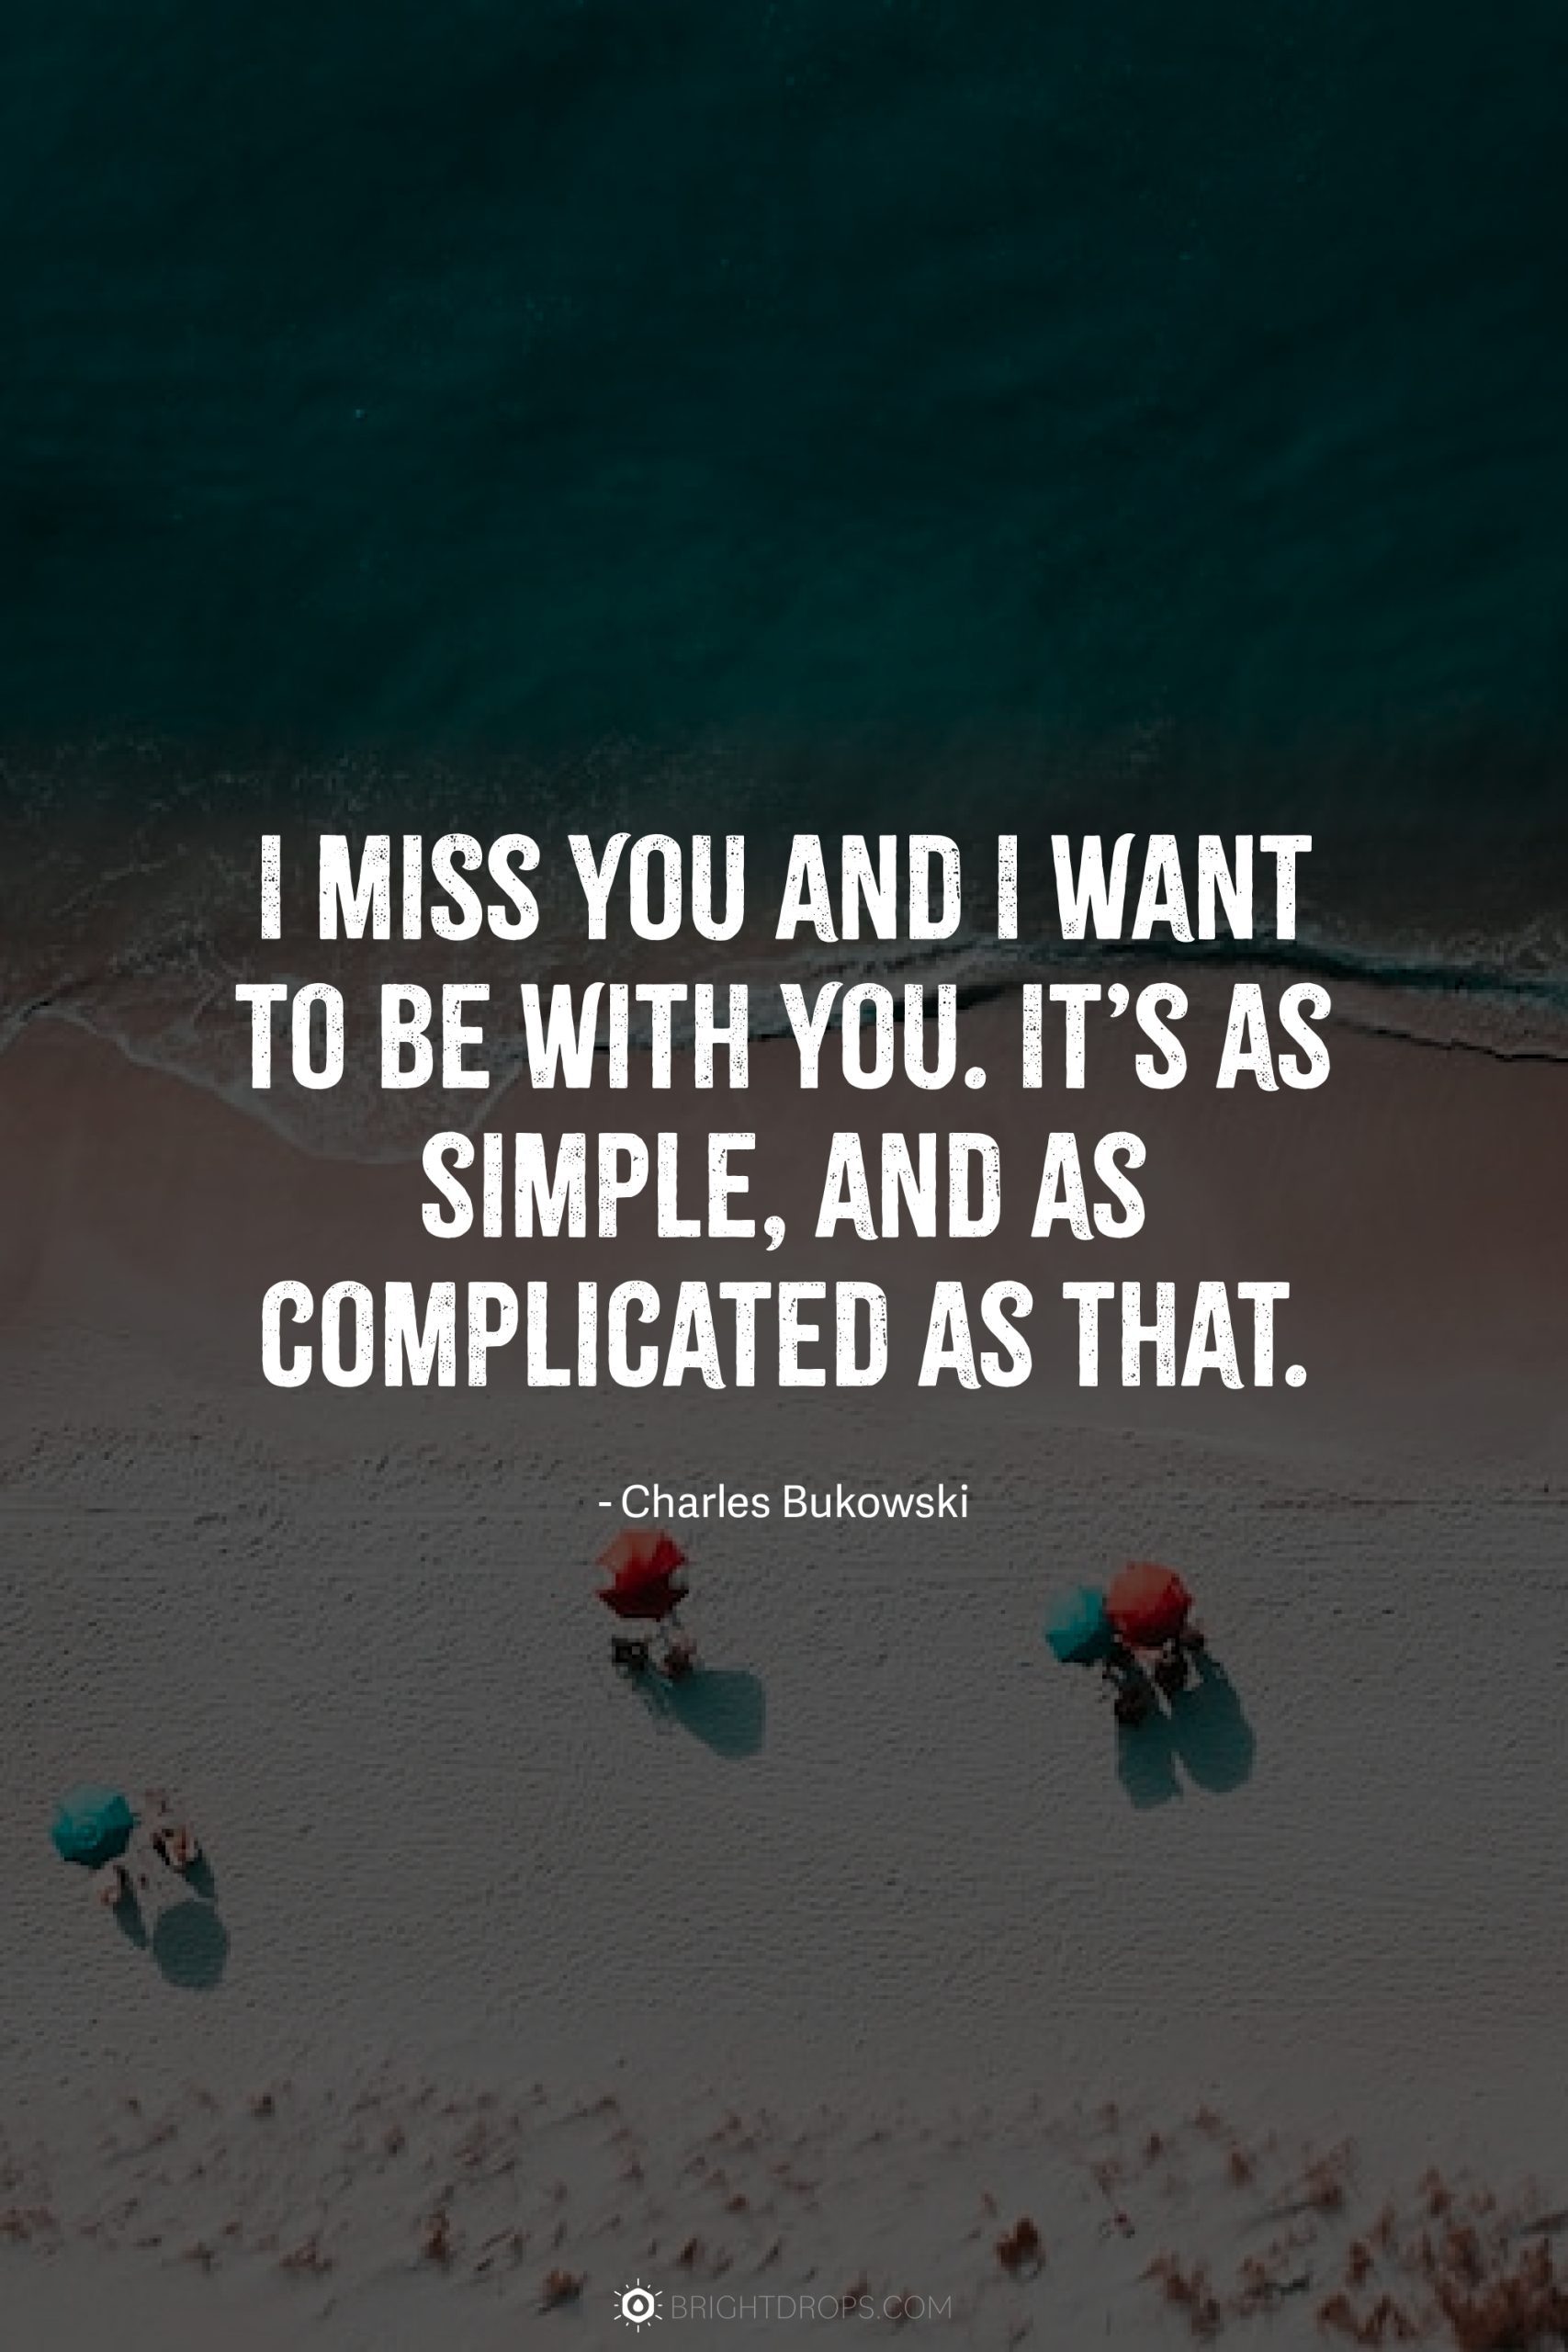 I miss you and I want to be with you. It’s as simple, and as complicated as that.